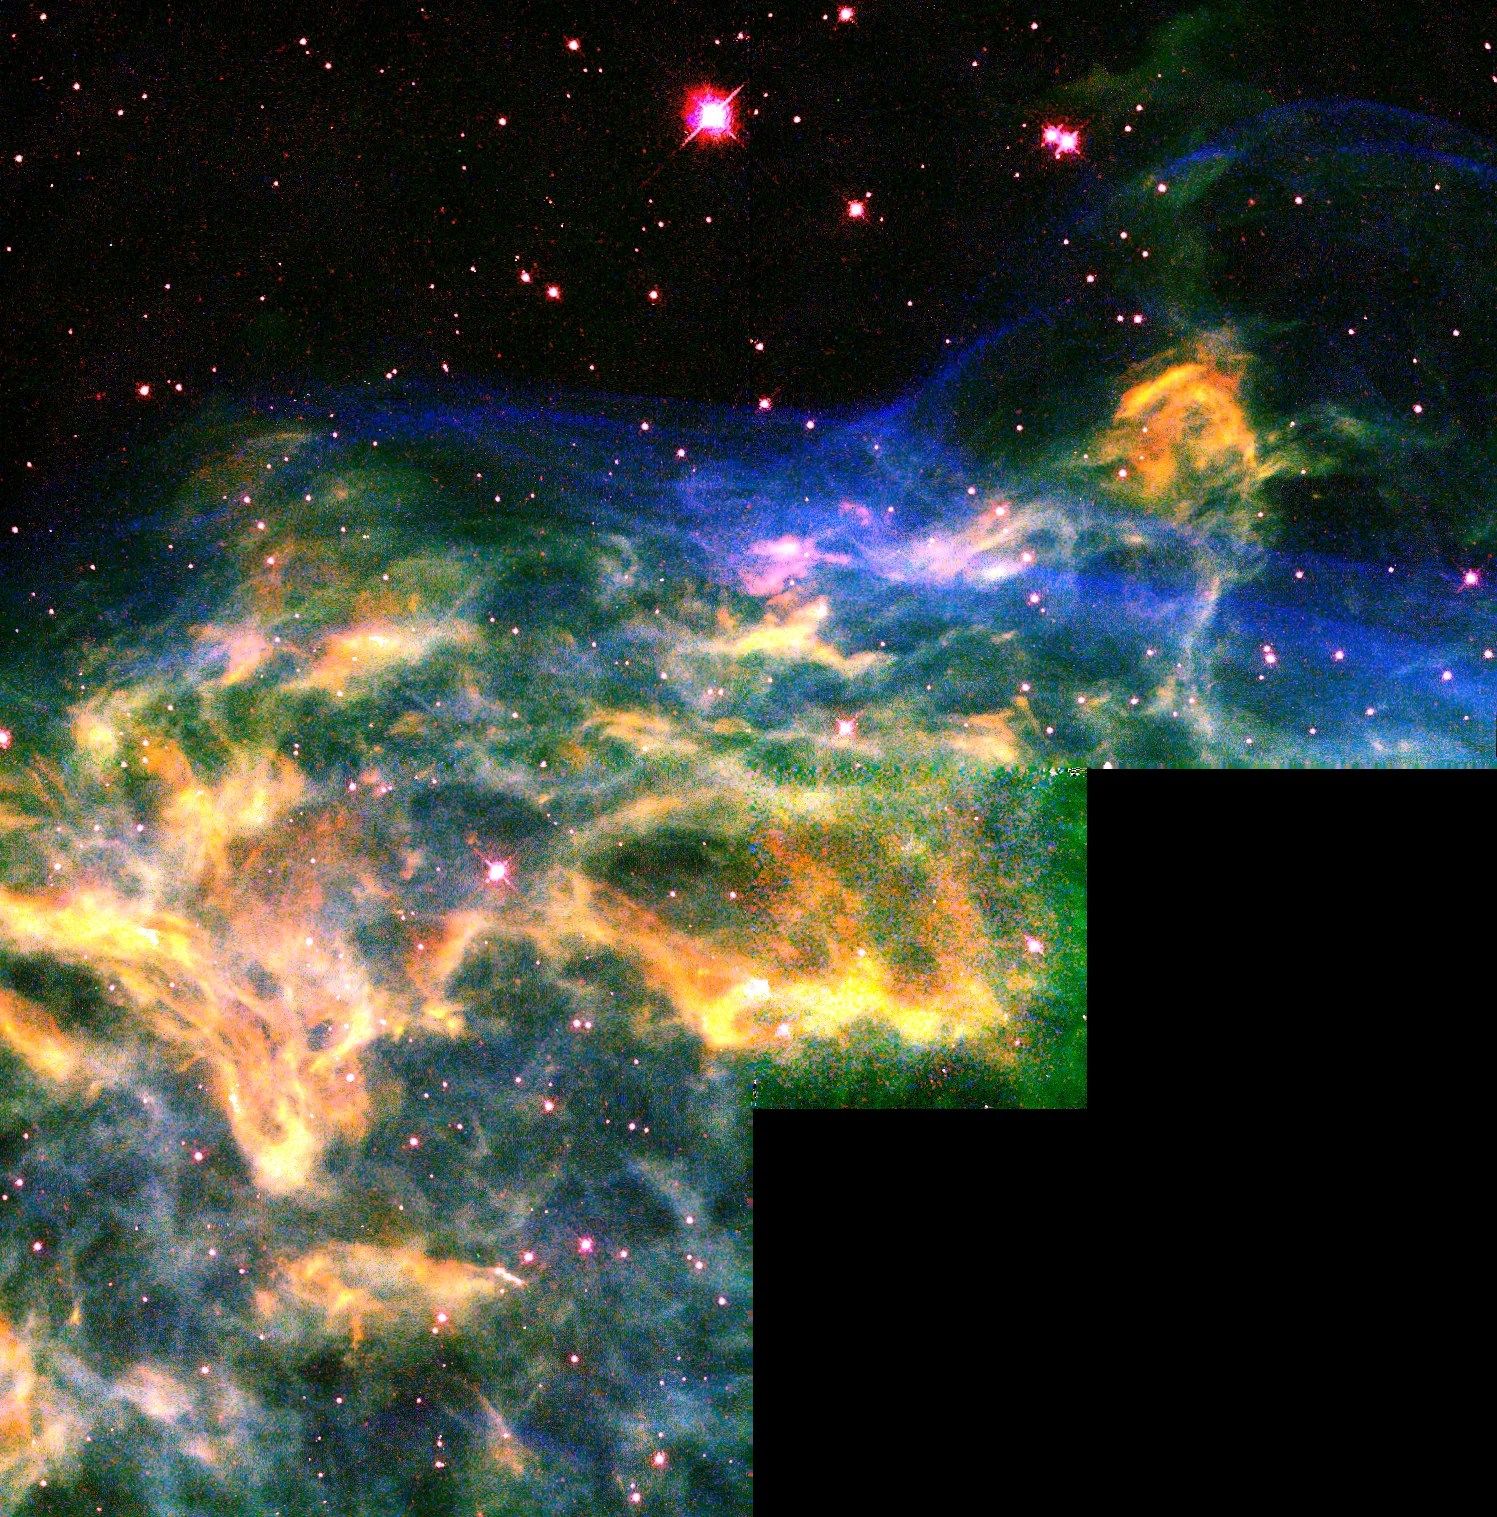 colorful streams of yellow, blue, and green gas and dust extend from the lower left to the center right.